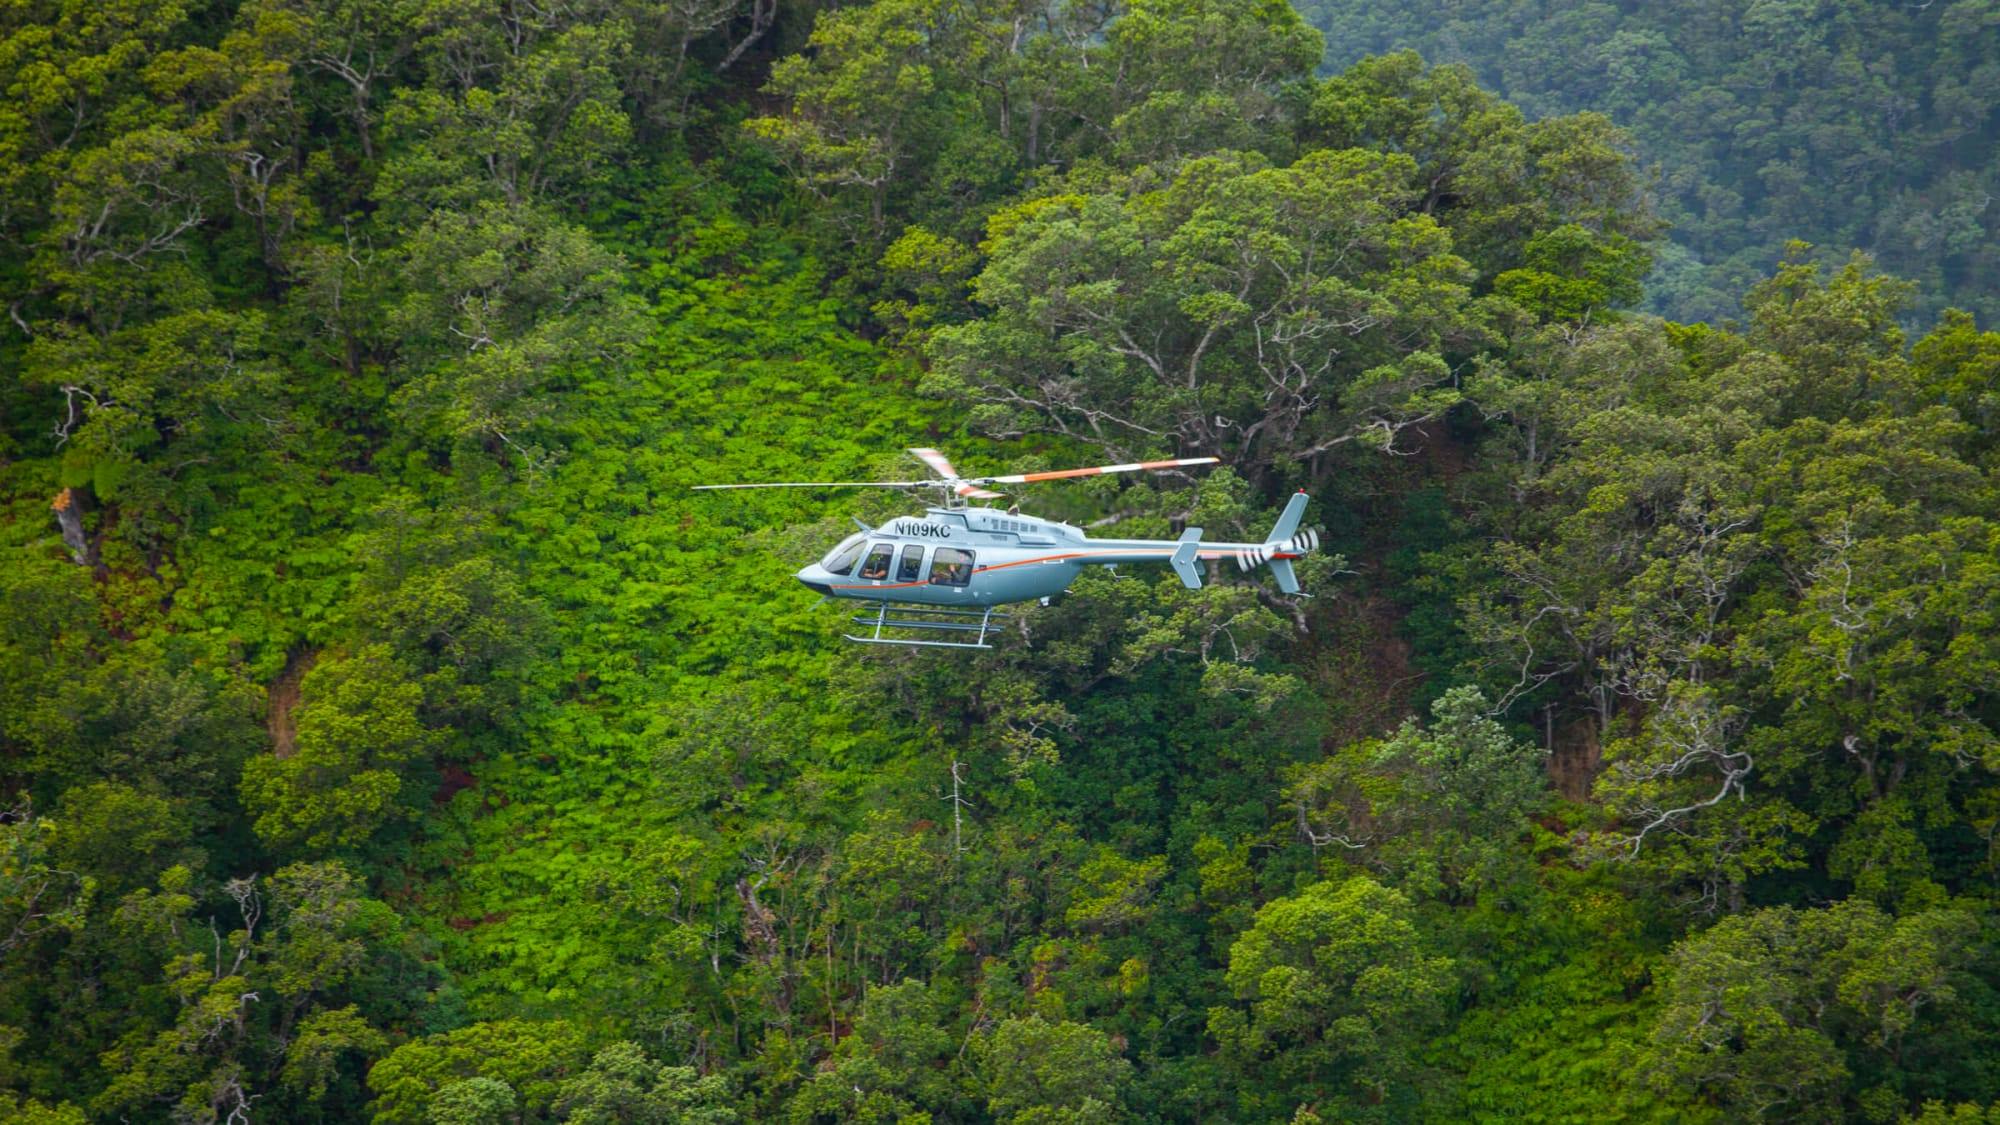 Helicopter flying over lush, green foliage 